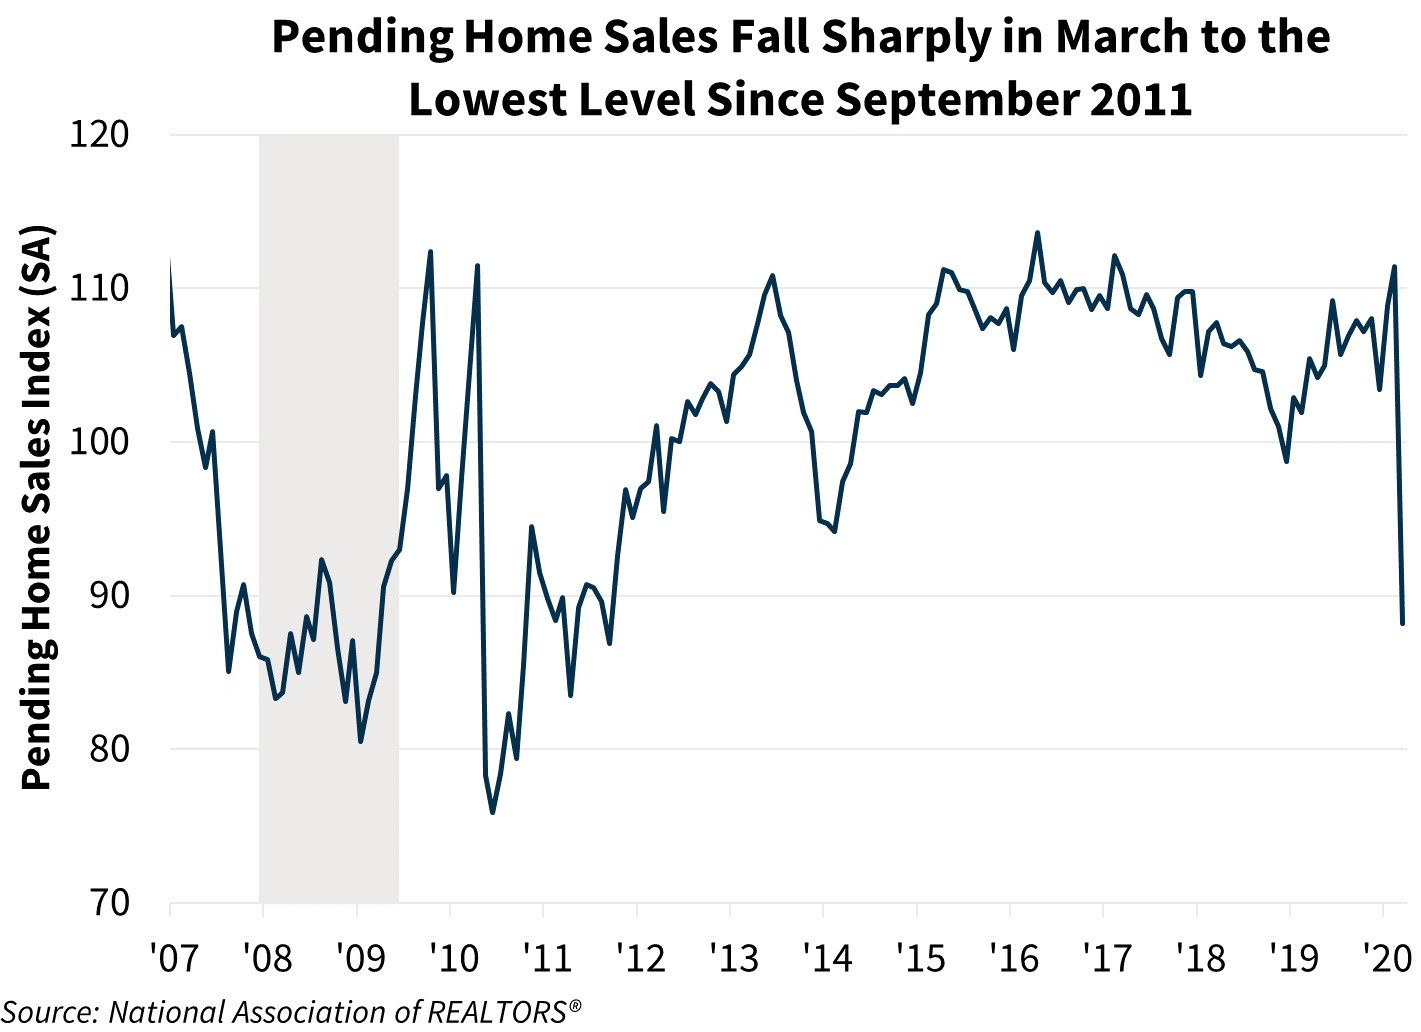 Pending Home Sales Fall Sharply in March to the Lowest Level Since September 2011